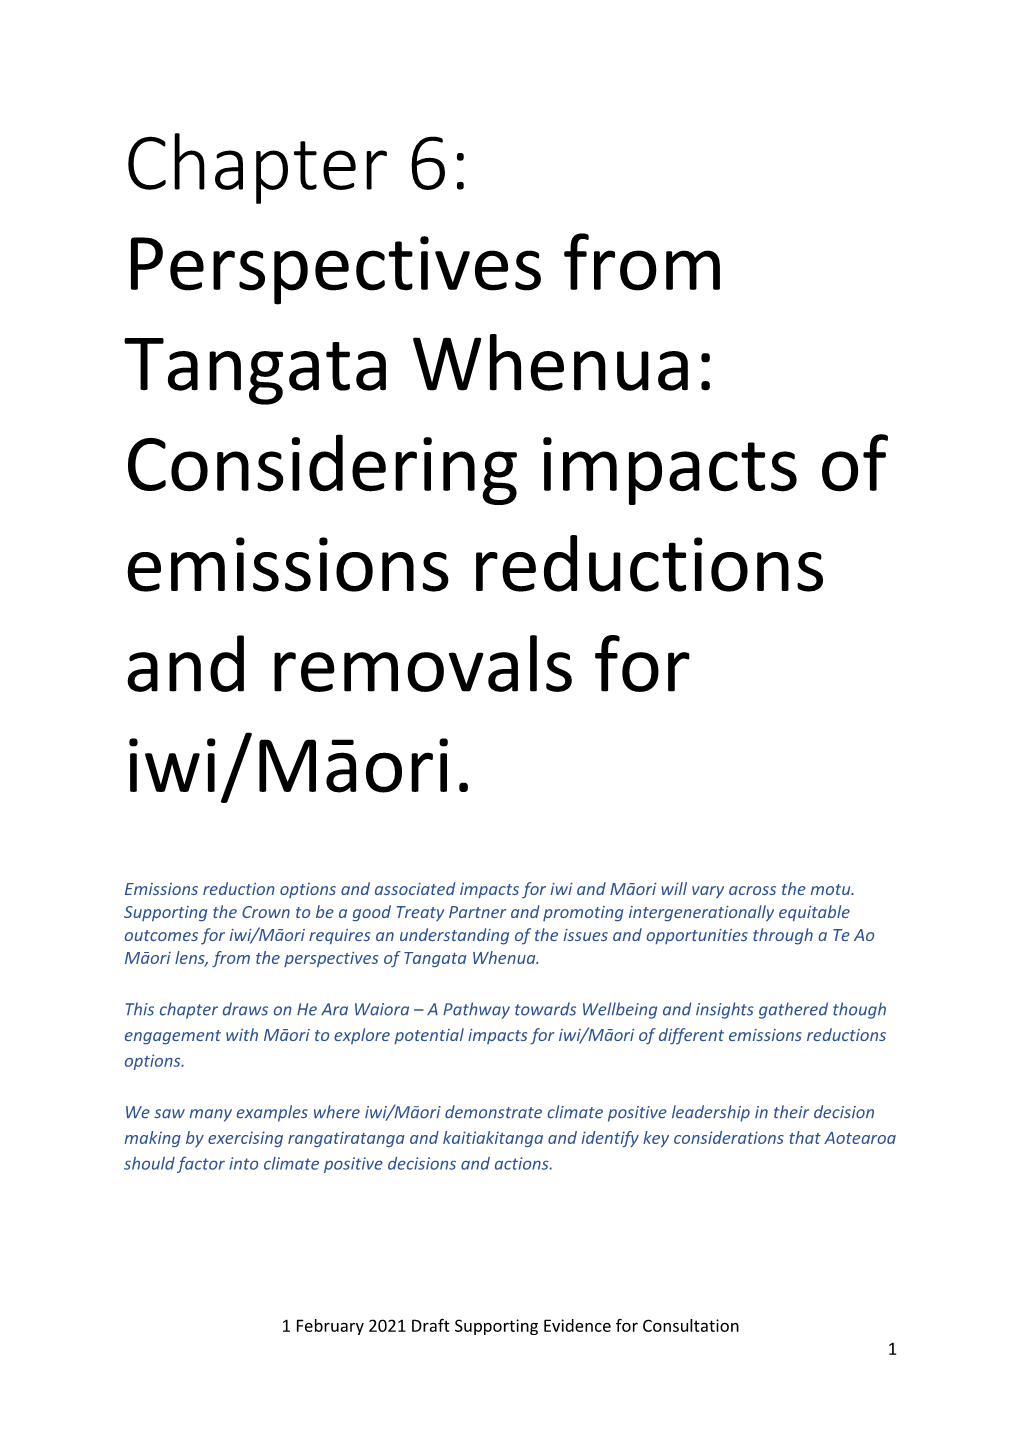 Perspectives from Tangata Whenua: Considering Impacts of Emissions Reductions and Removals for Iwi/Māori